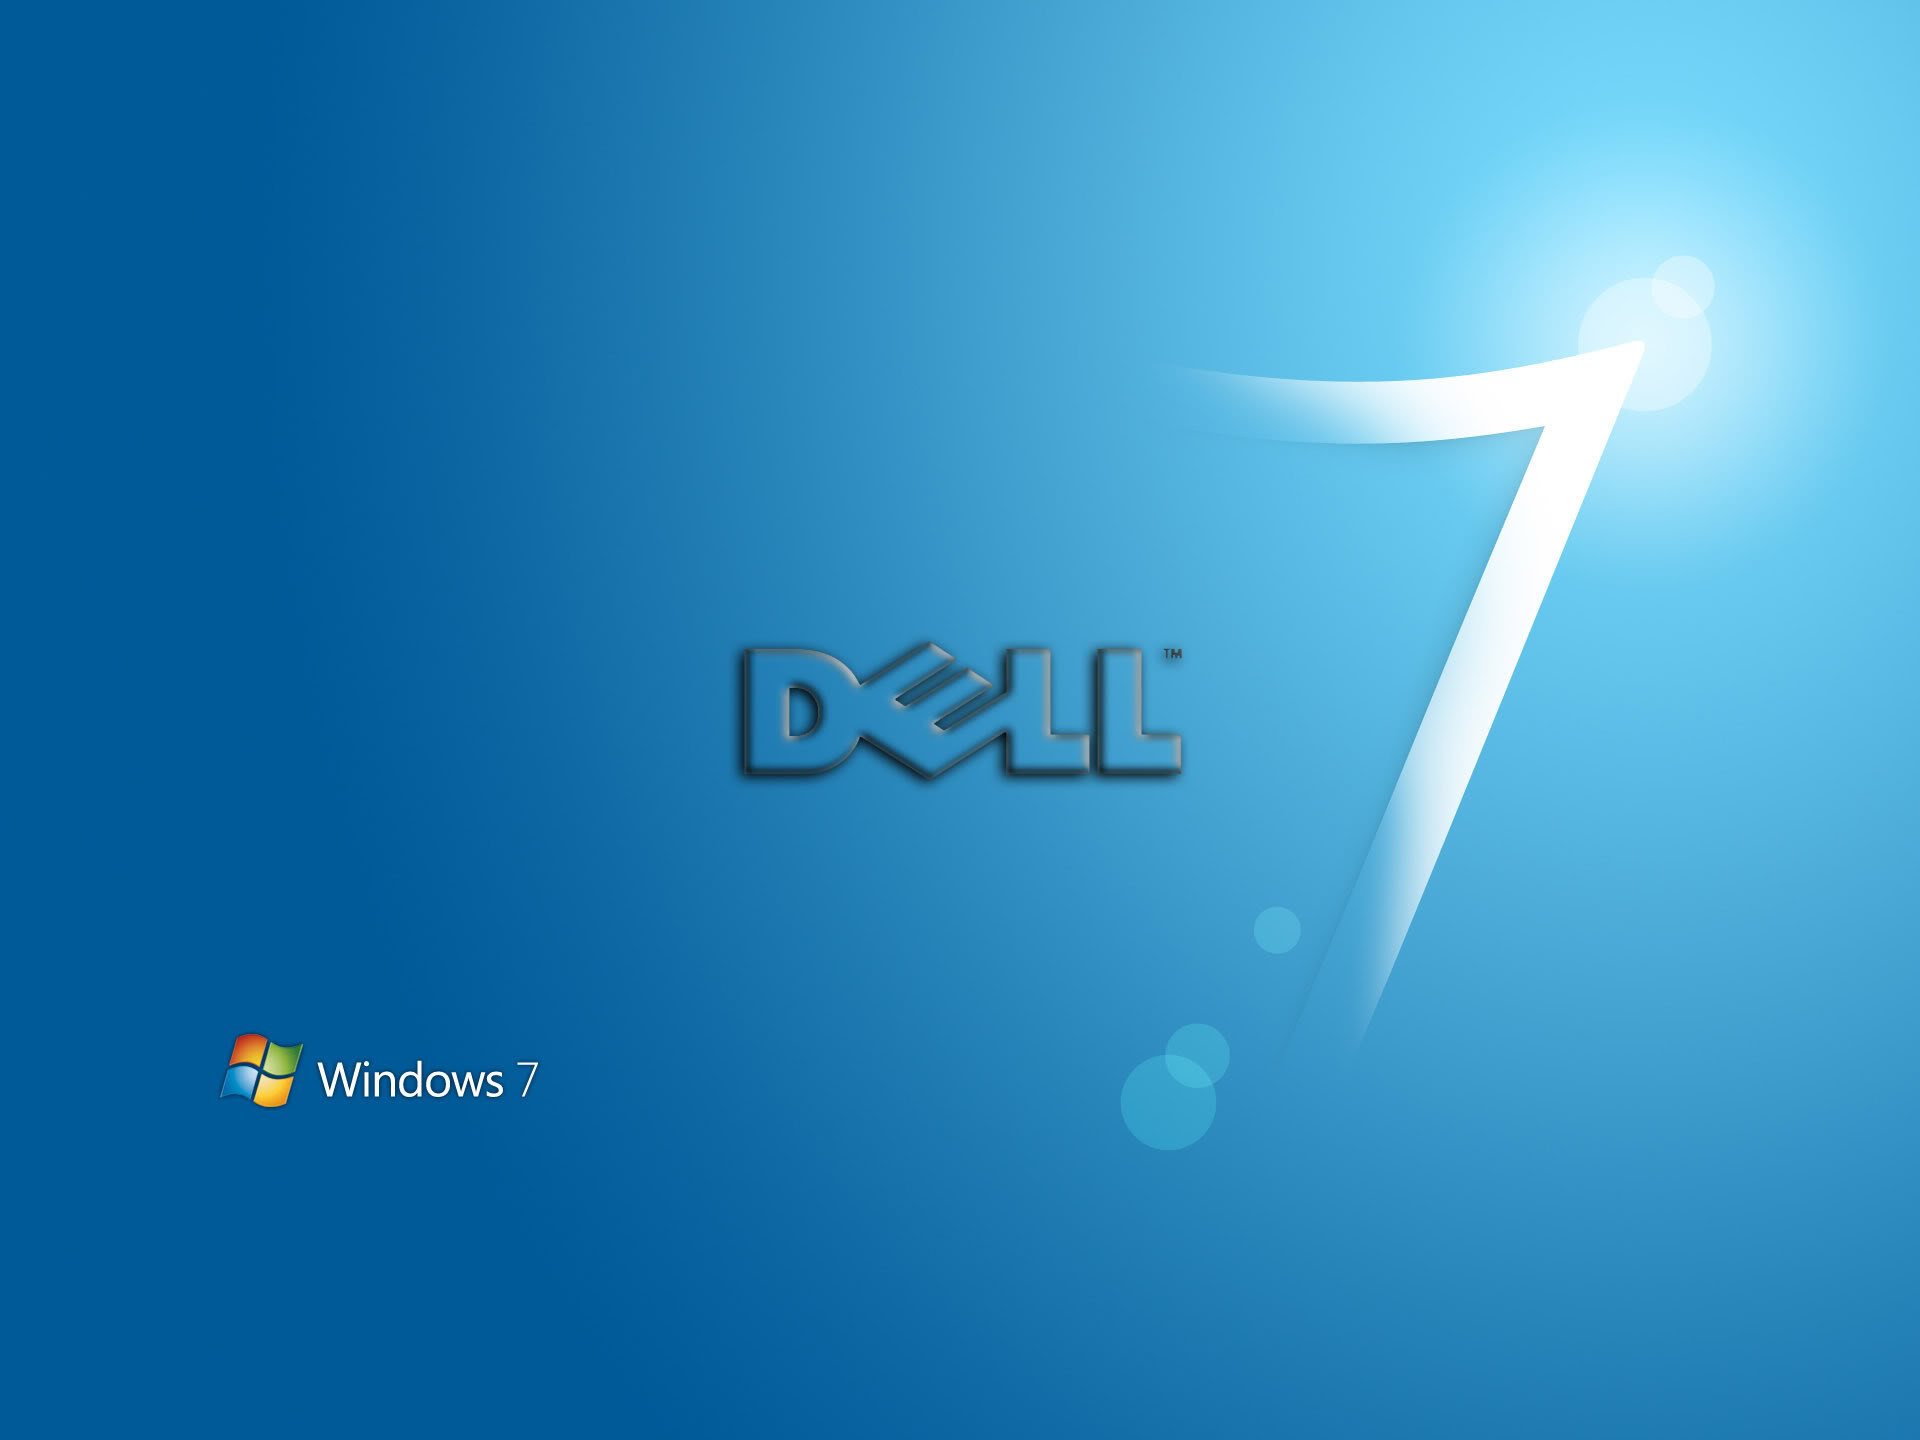 Dell Home Screen Wallpapers | Name wallpaper, Computer screen wallpaper,  Minion wallpaper hd